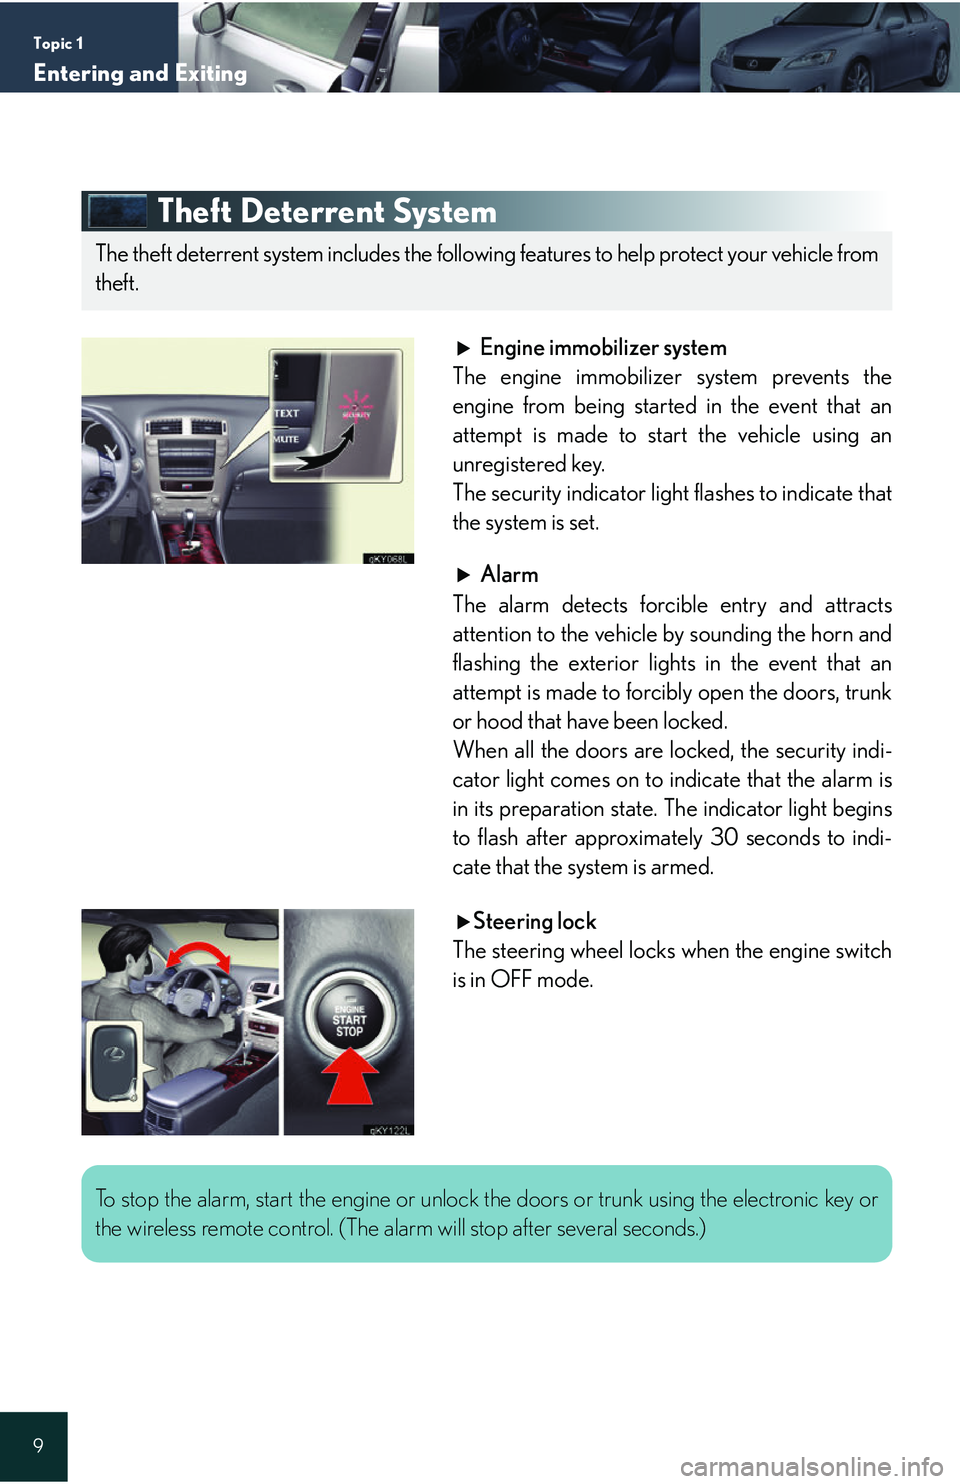 Lexus IS250 2006  Lexus Parking Assist-sensor / LEXUS 2006 IS350/250 QUICK REFERENCE GUIDE Topic 1
Entering and Exiting
9
Theft Deterrent System
Engine immobilizer system
The engine immobilizer system prevents the
engine from being started in the event that an
attempt is made to start the v